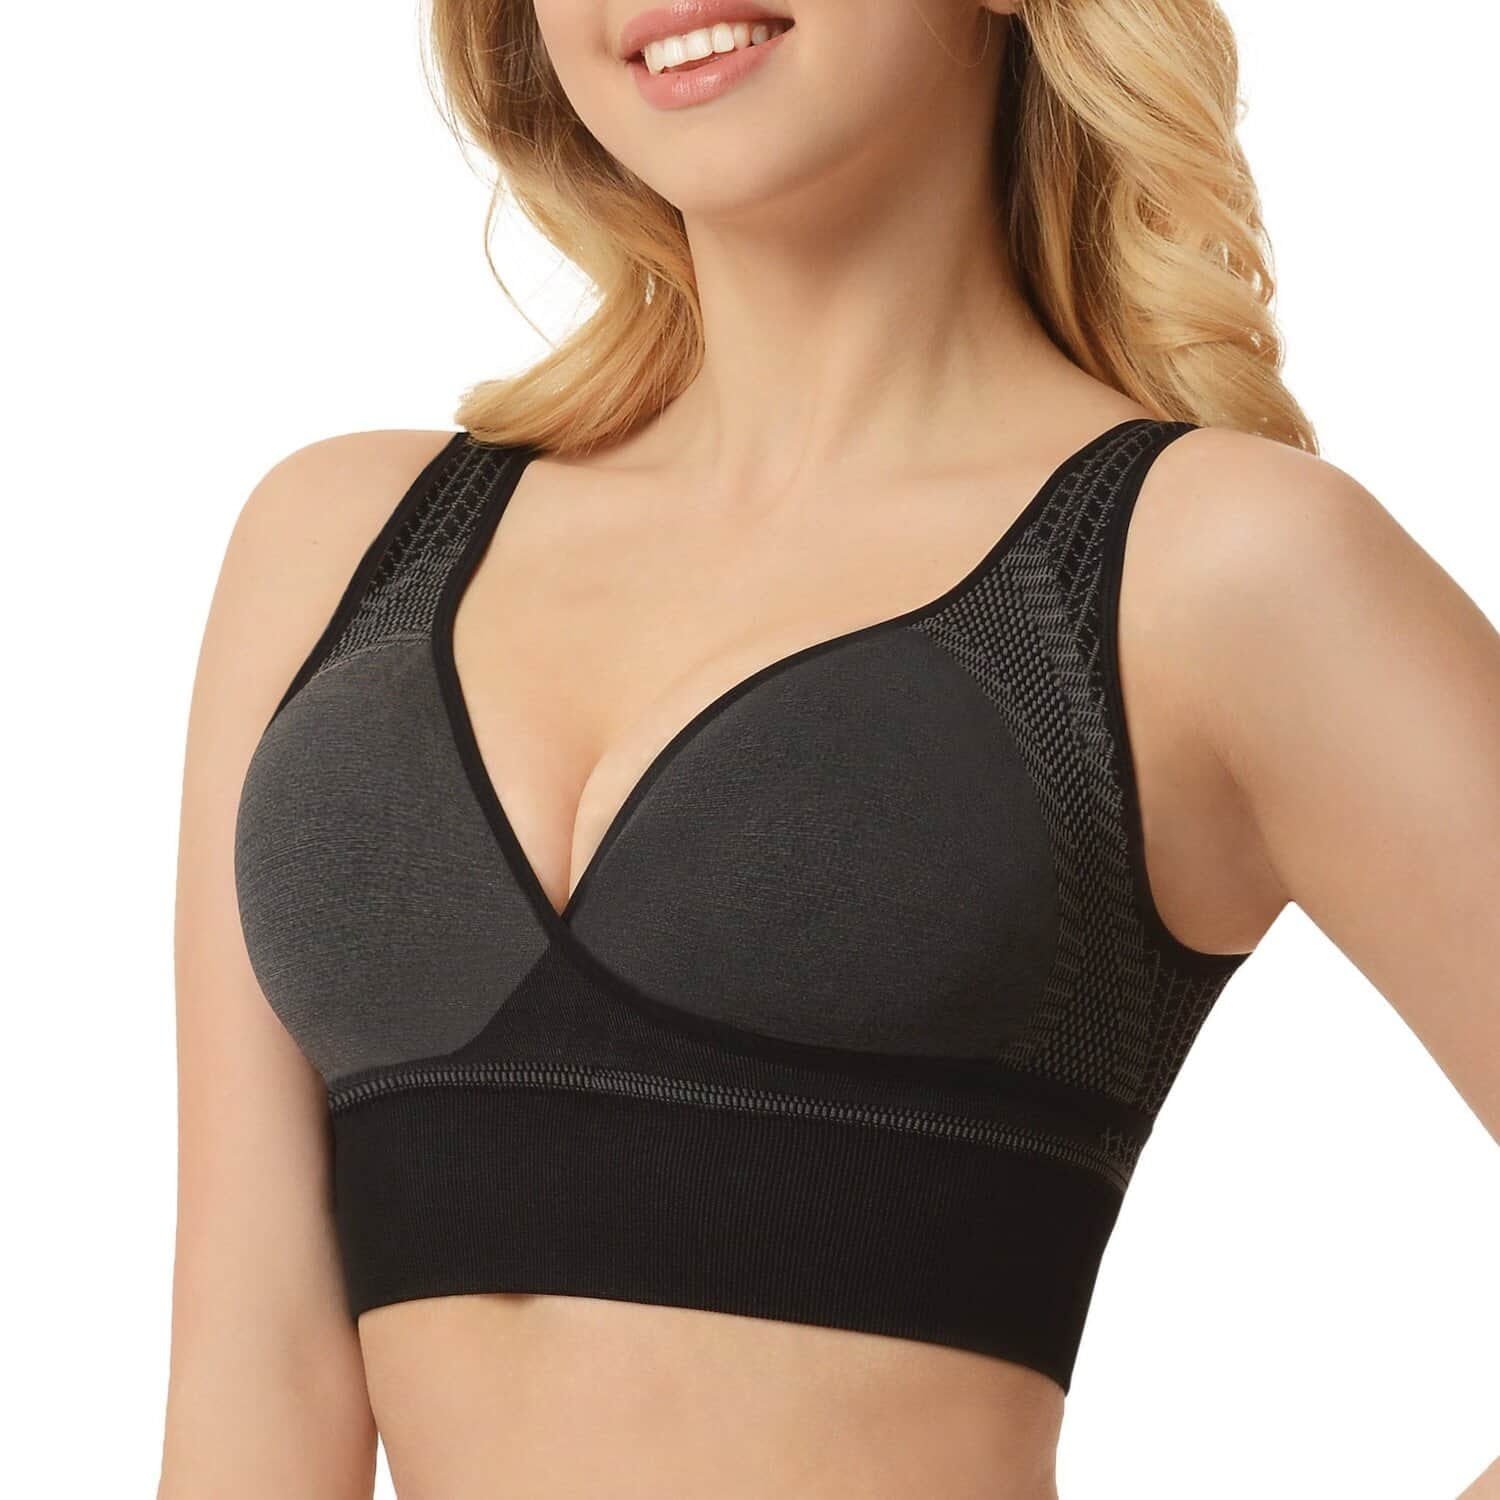 How Should a Sports Bra Fit? – LC Activewear